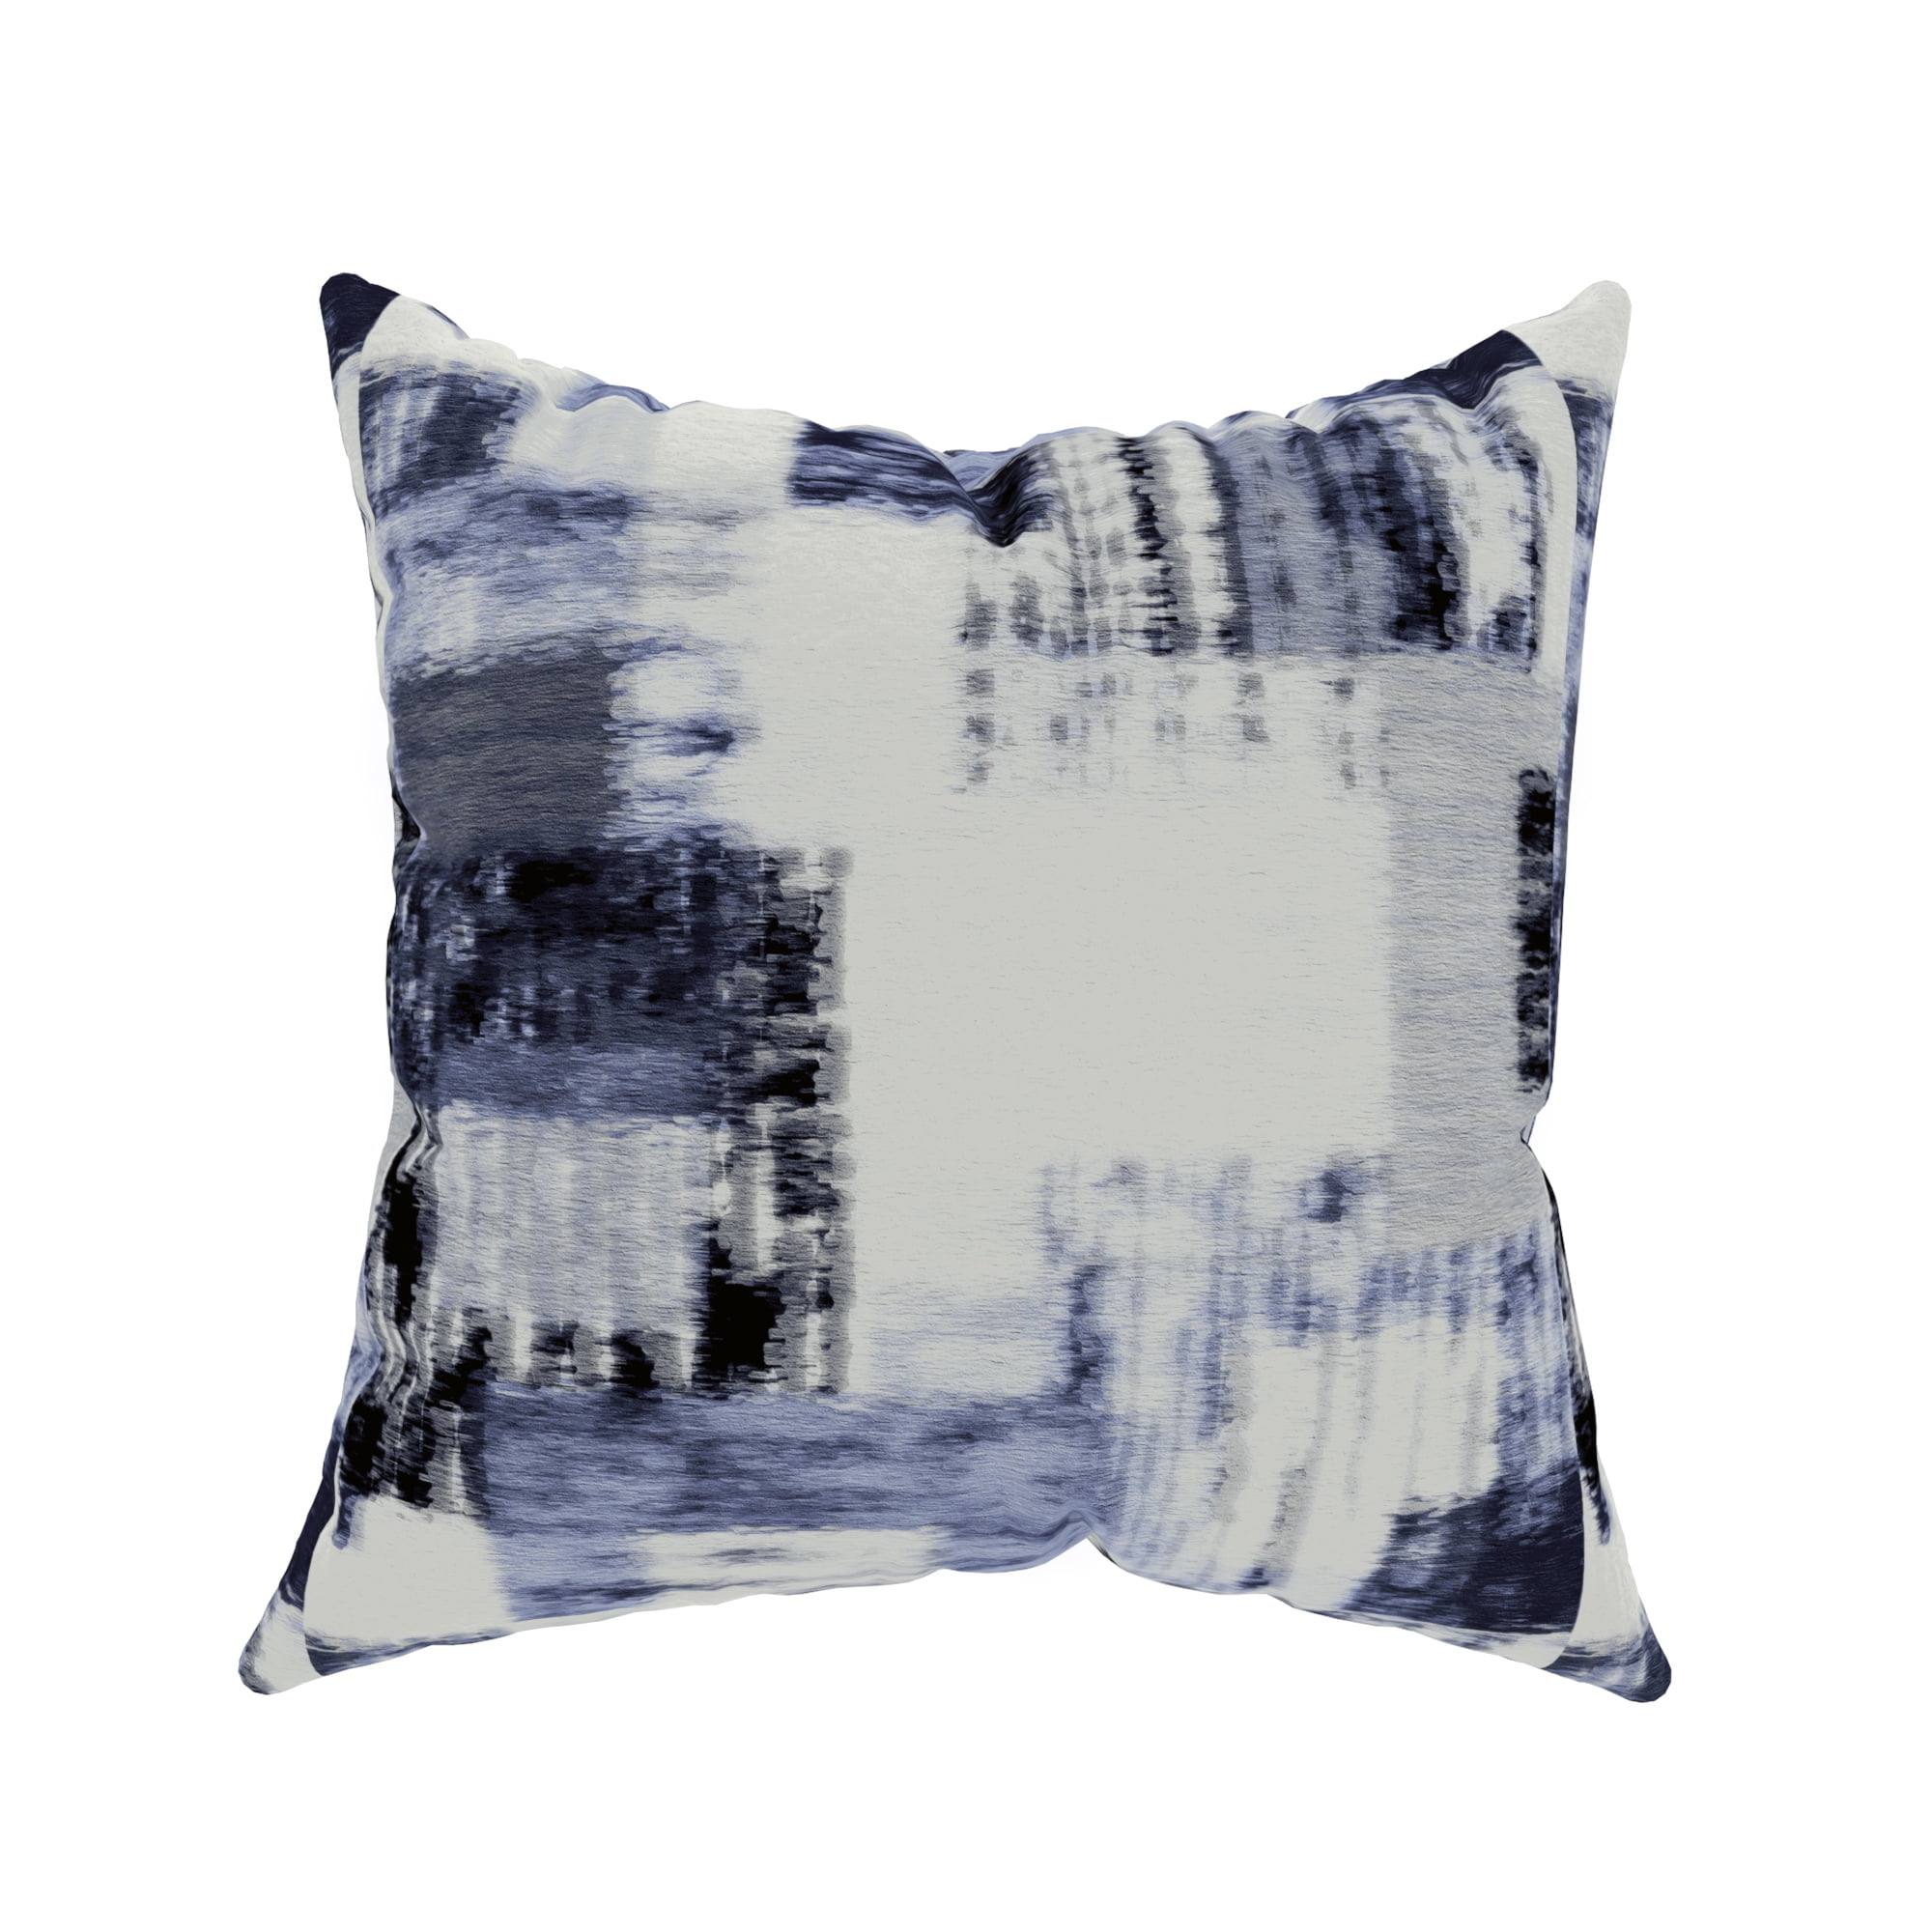 Blue Throw PILLOW COVER Decorative Abstract Geometric Bed Cushion Case 18x18" 